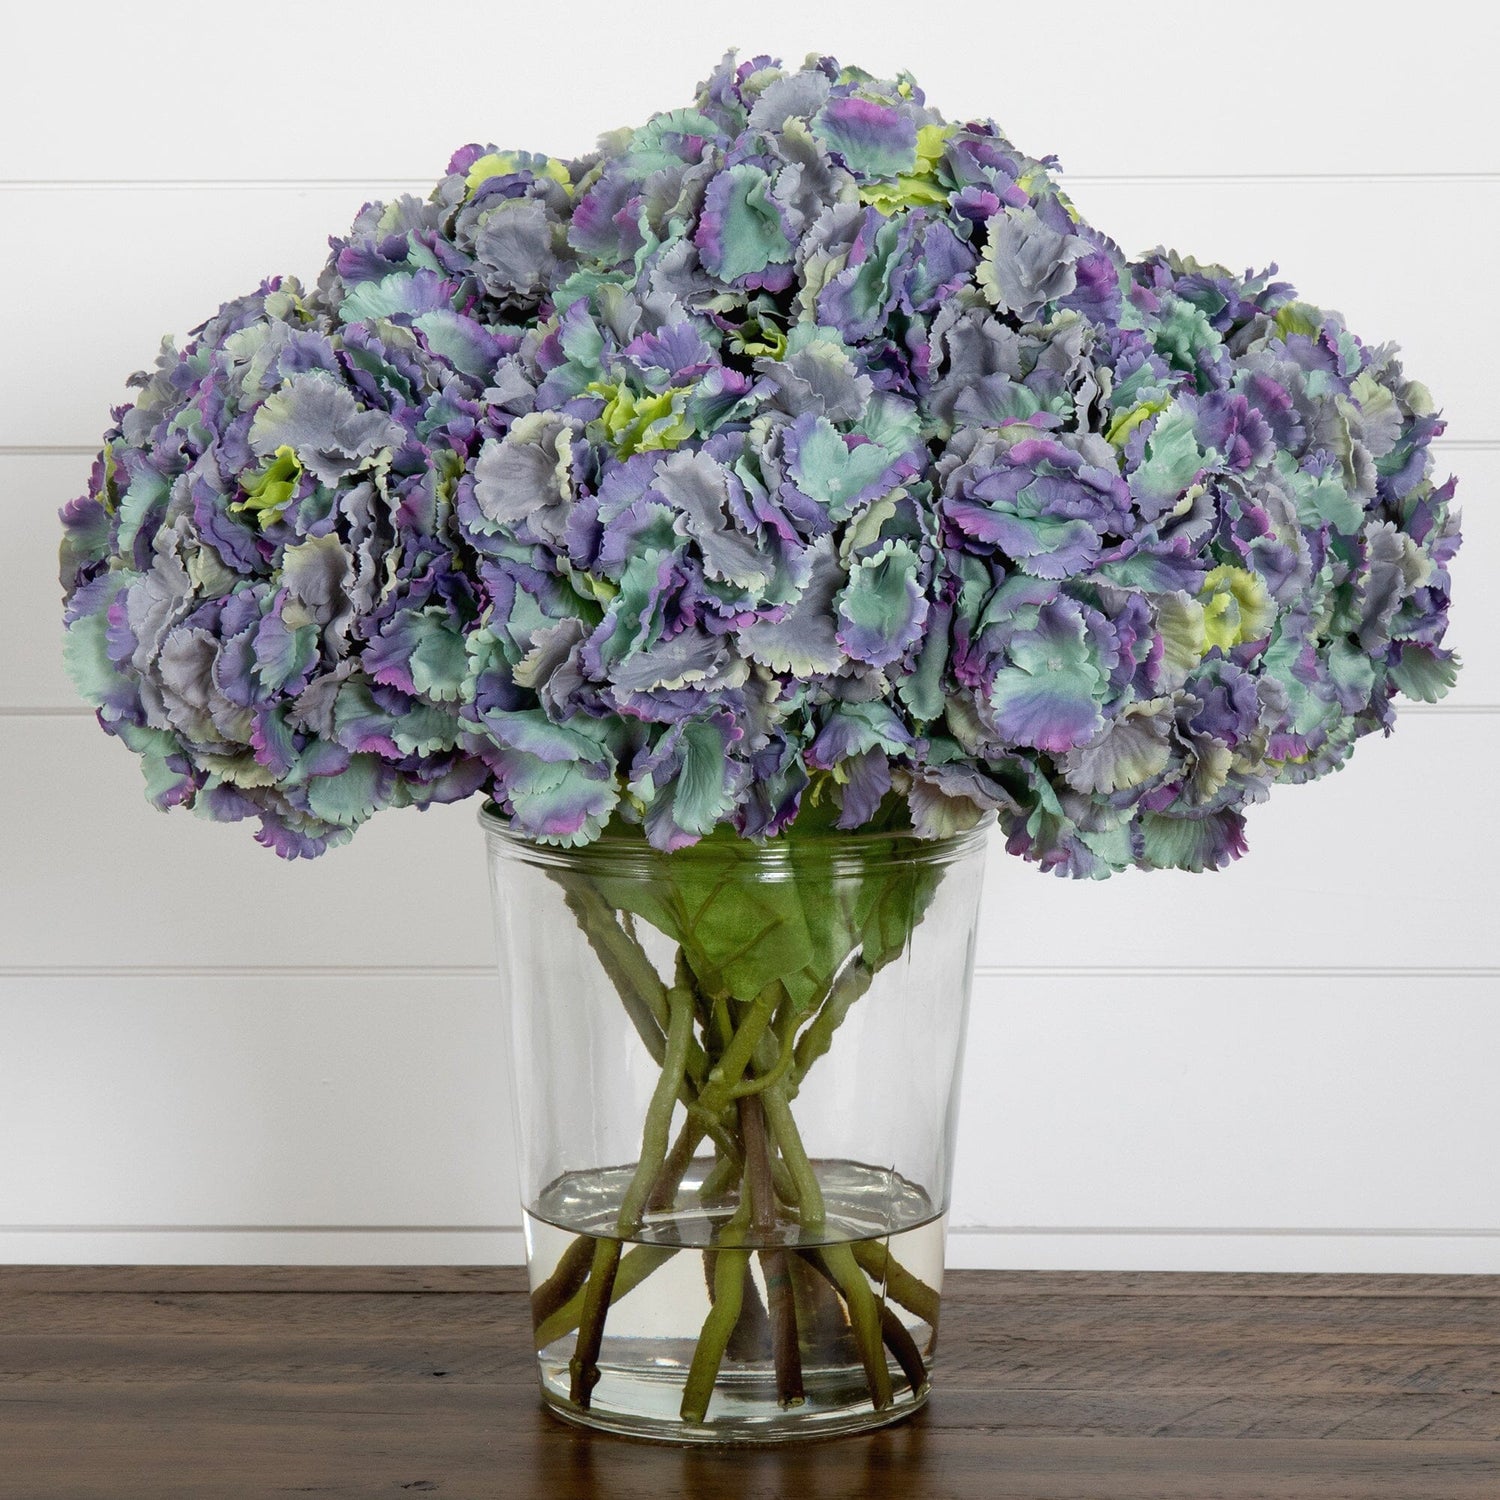 Signature Collection 18” Blooming Hydrangea Artificial Arrangement in Glass Vase